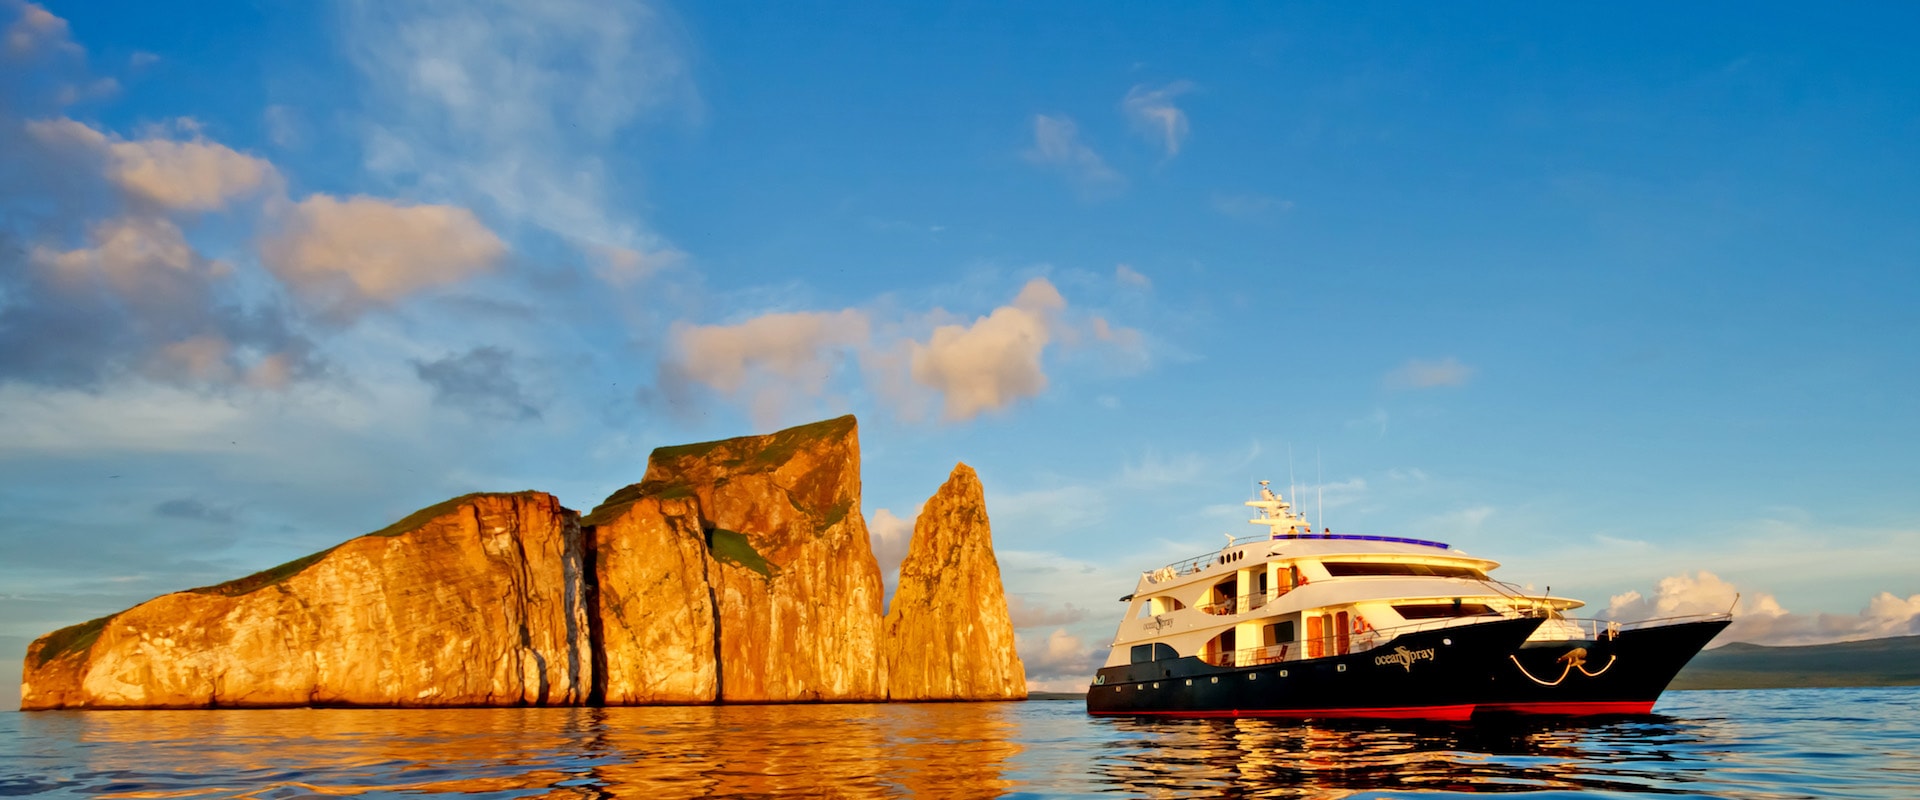 53 Cruises in Galapagos - LiveAboard.com